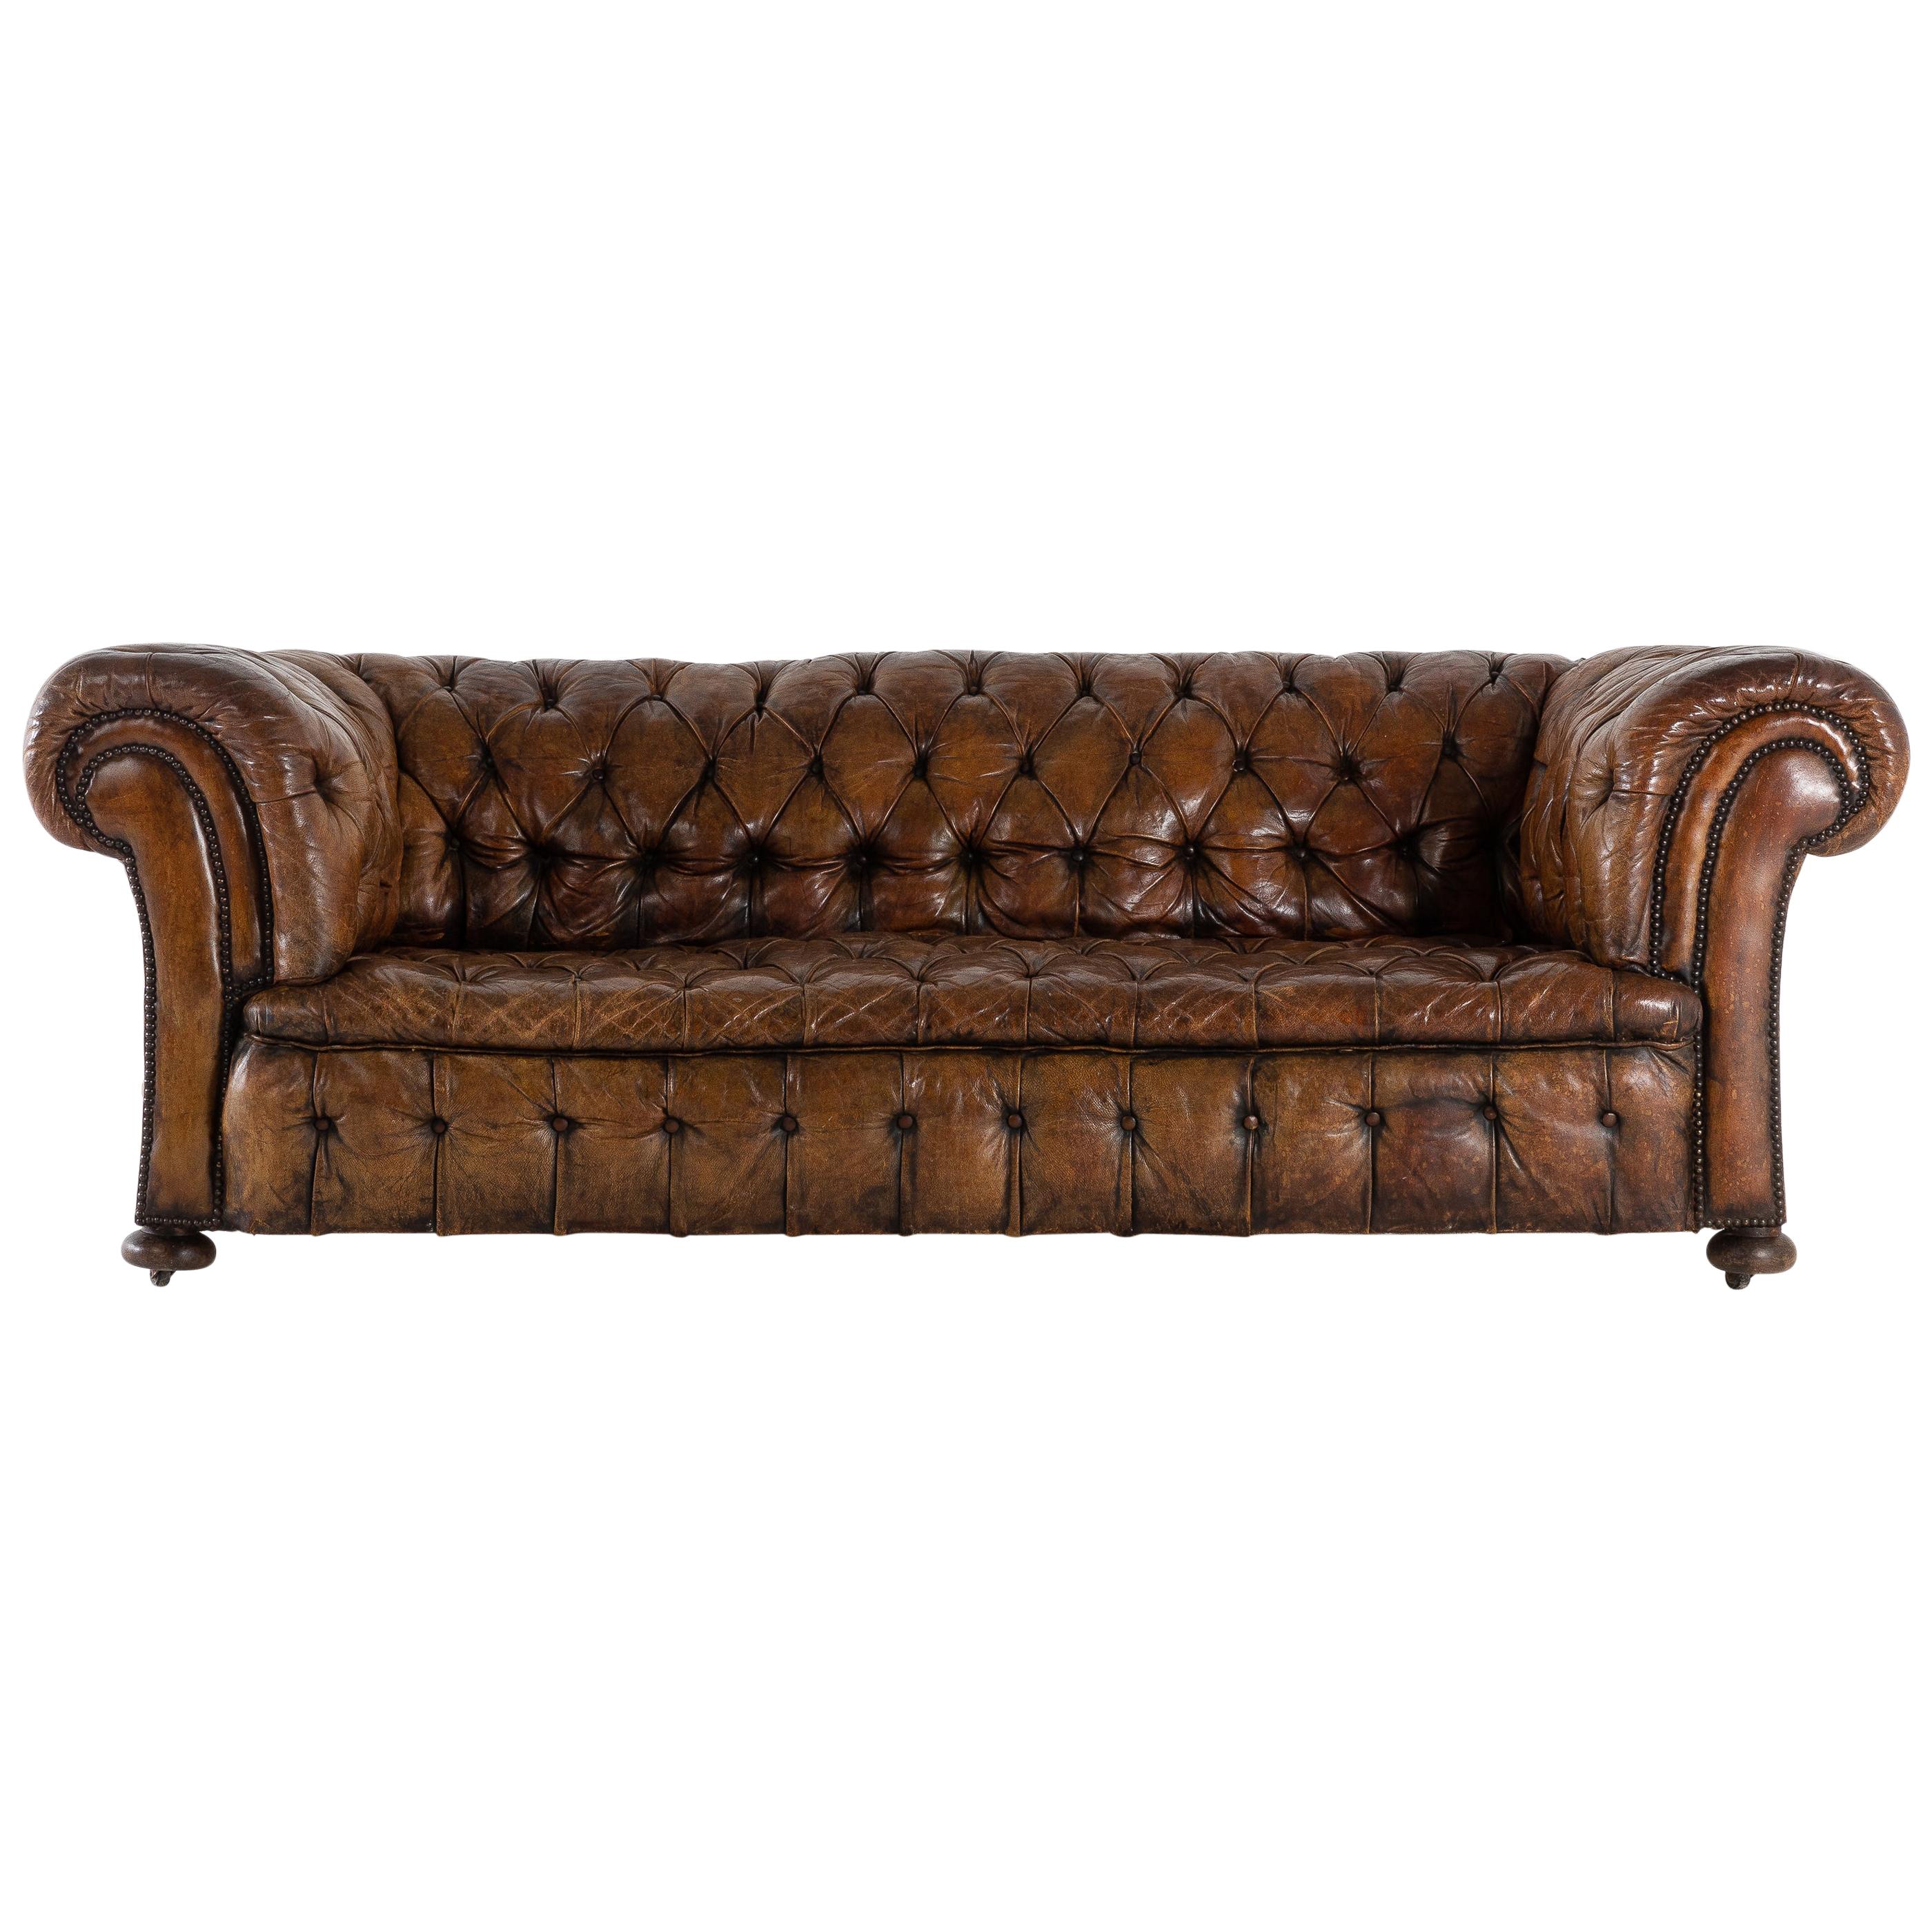 Large Leather Chesterfield, circa 1900